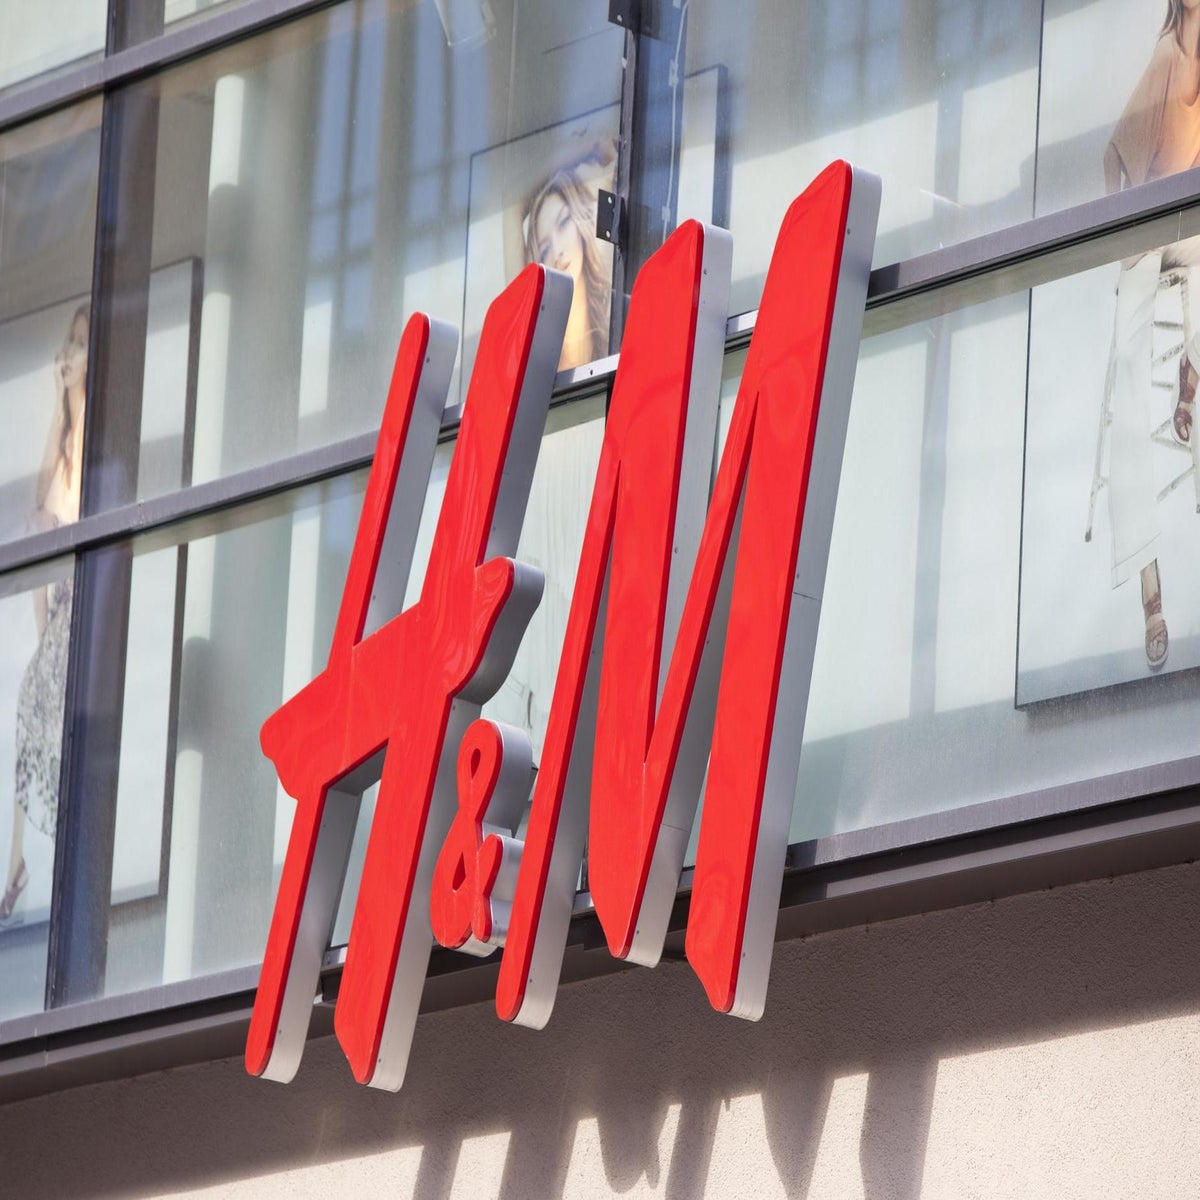 H&M accused of 'greenwashing' over plans to make clothes from sustainable  fabric, The Independent